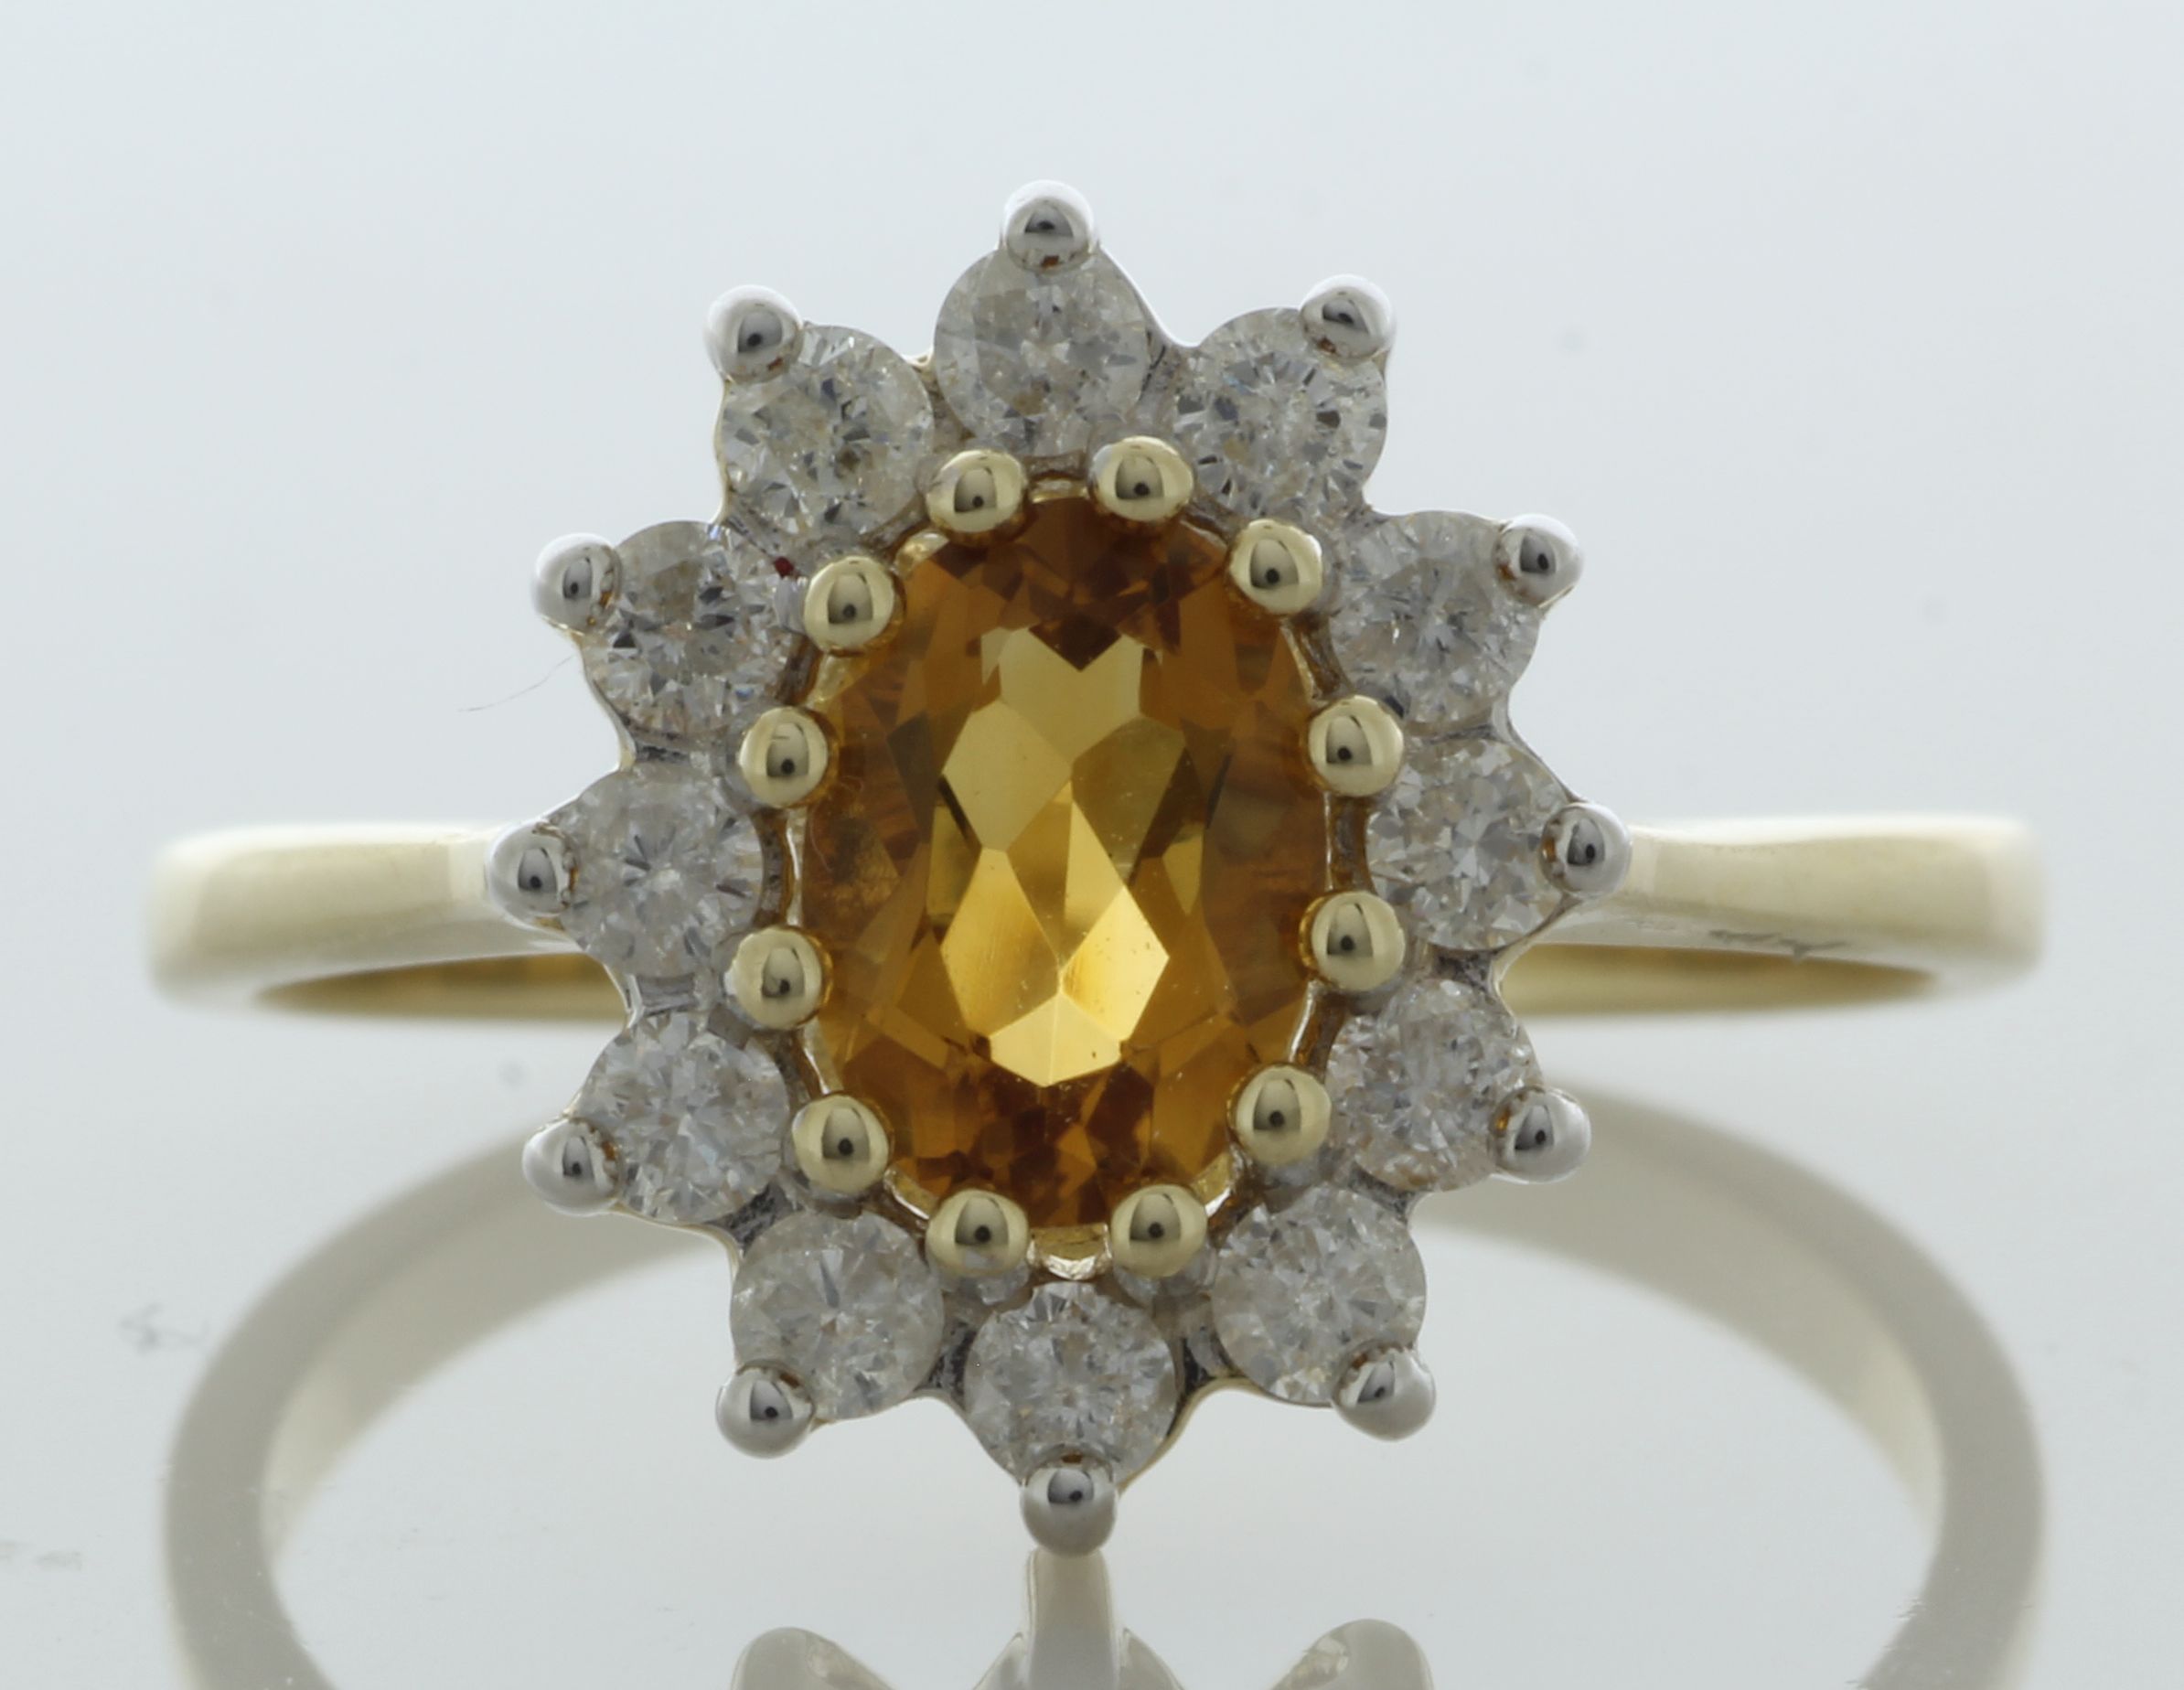 9ct Yellow Gold Oval Centre and Citrine Ring (C0.84) 0.40 Carats